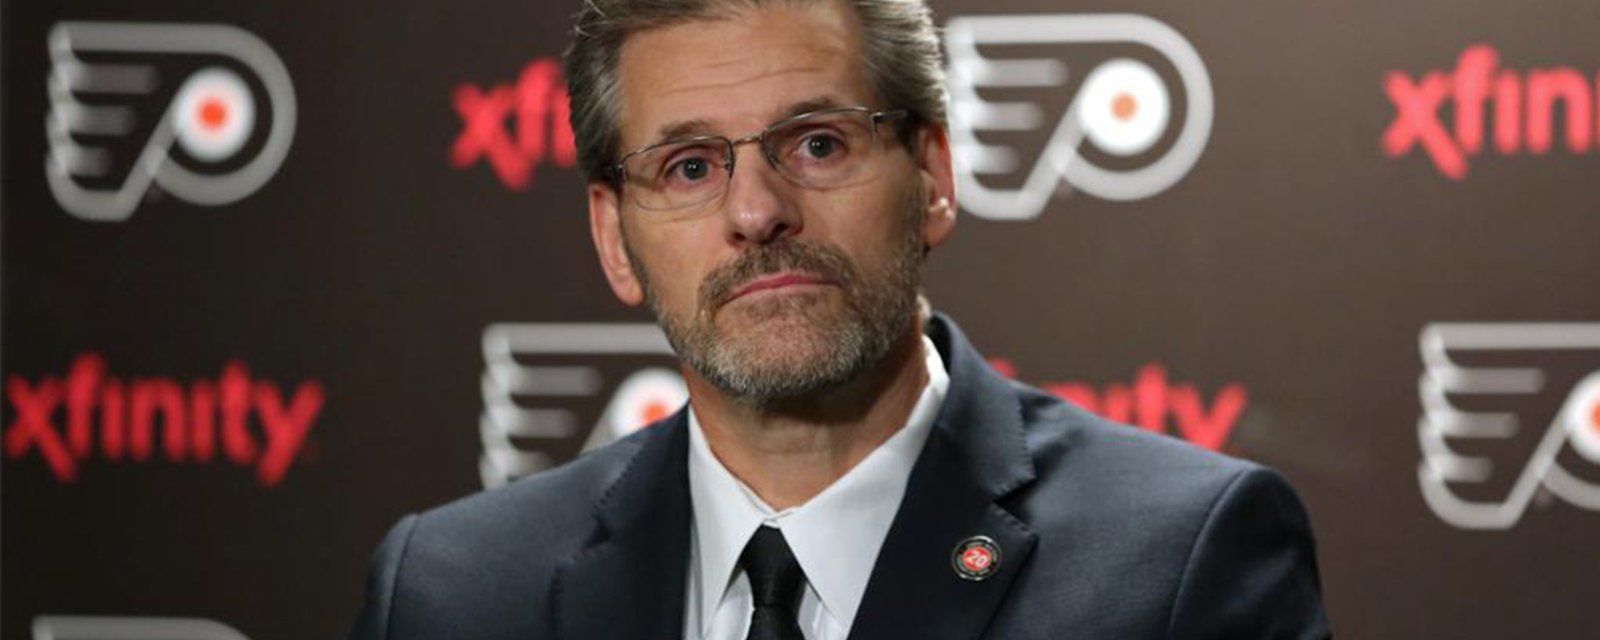 Rumor: Three teams linked to Flyers in trade speculation